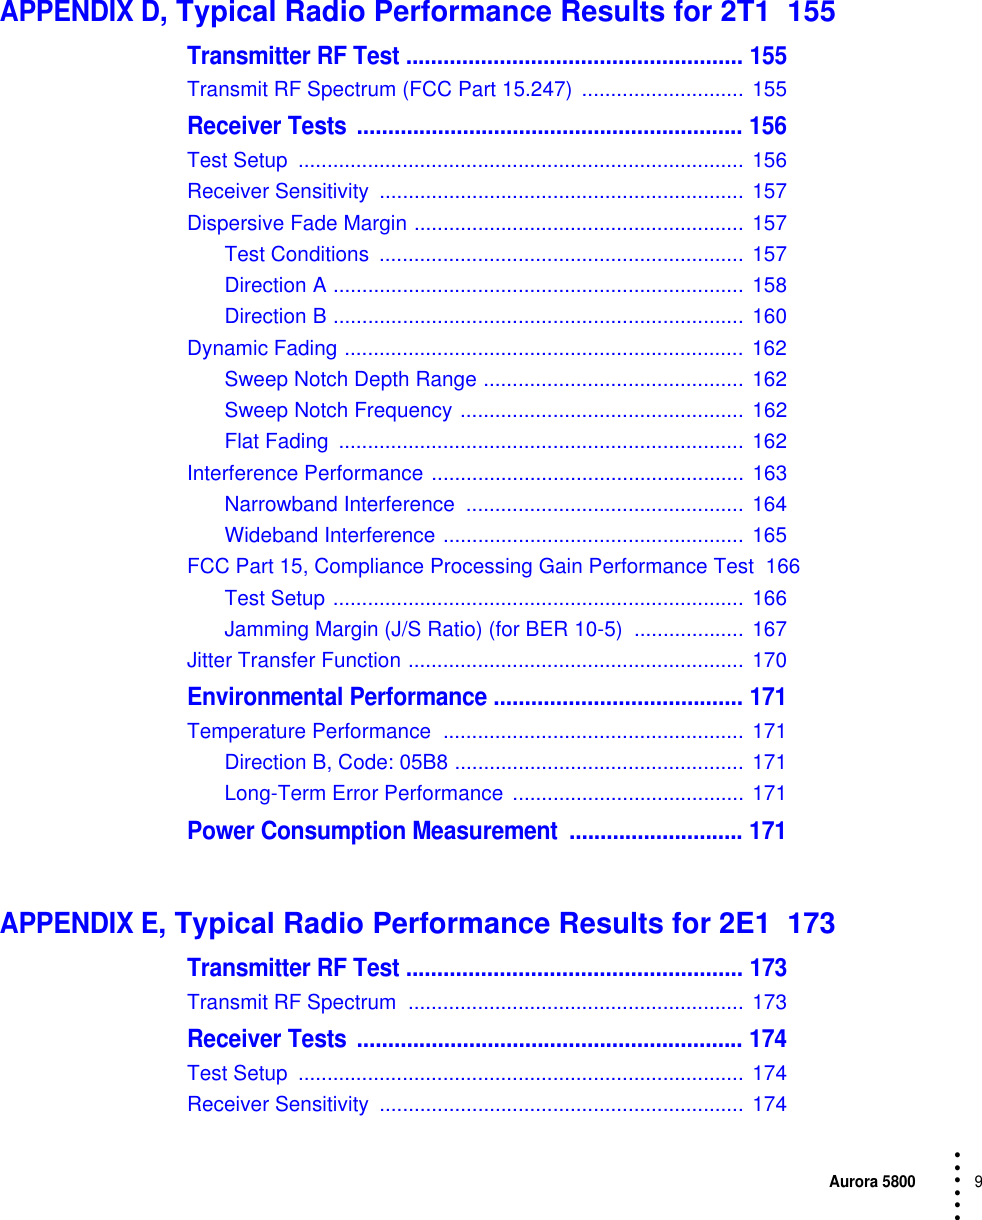 Aurora 58009 • • • •••APPENDIX D, Typical Radio Performance Results for 2T1  155Transmitter RF Test ...................................................... 155Transmit RF Spectrum (FCC Part 15.247)  ............................ 155Receiver Tests .............................................................. 156Test Setup  .............................................................................  156Receiver Sensitivity  ............................................................... 157Dispersive Fade Margin ......................................................... 157Test Conditions  ............................................................... 157Direction A ....................................................................... 158Direction B ....................................................................... 160Dynamic Fading ..................................................................... 162Sweep Notch Depth Range ............................................. 162Sweep Notch Frequency ................................................. 162Flat Fading  ......................................................................  162Interference Performance ...................................................... 163Narrowband Interference  ................................................ 164Wideband Interference .................................................... 165FCC Part 15, Compliance Processing Gain Performance Test  166Test Setup ....................................................................... 166Jamming Margin (J/S Ratio) (for BER 10-5)  ................... 167Jitter Transfer Function .......................................................... 170Environmental Performance ........................................ 171Temperature Performance  .................................................... 171Direction B, Code: 05B8 .................................................. 171Long-Term Error Performance  ........................................ 171Power Consumption Measurement  ............................ 171APPENDIX E, Typical Radio Performance Results for 2E1  173Transmitter RF Test ...................................................... 173Transmit RF Spectrum  .......................................................... 173Receiver Tests .............................................................. 174Test Setup  .............................................................................  174Receiver Sensitivity  ............................................................... 174